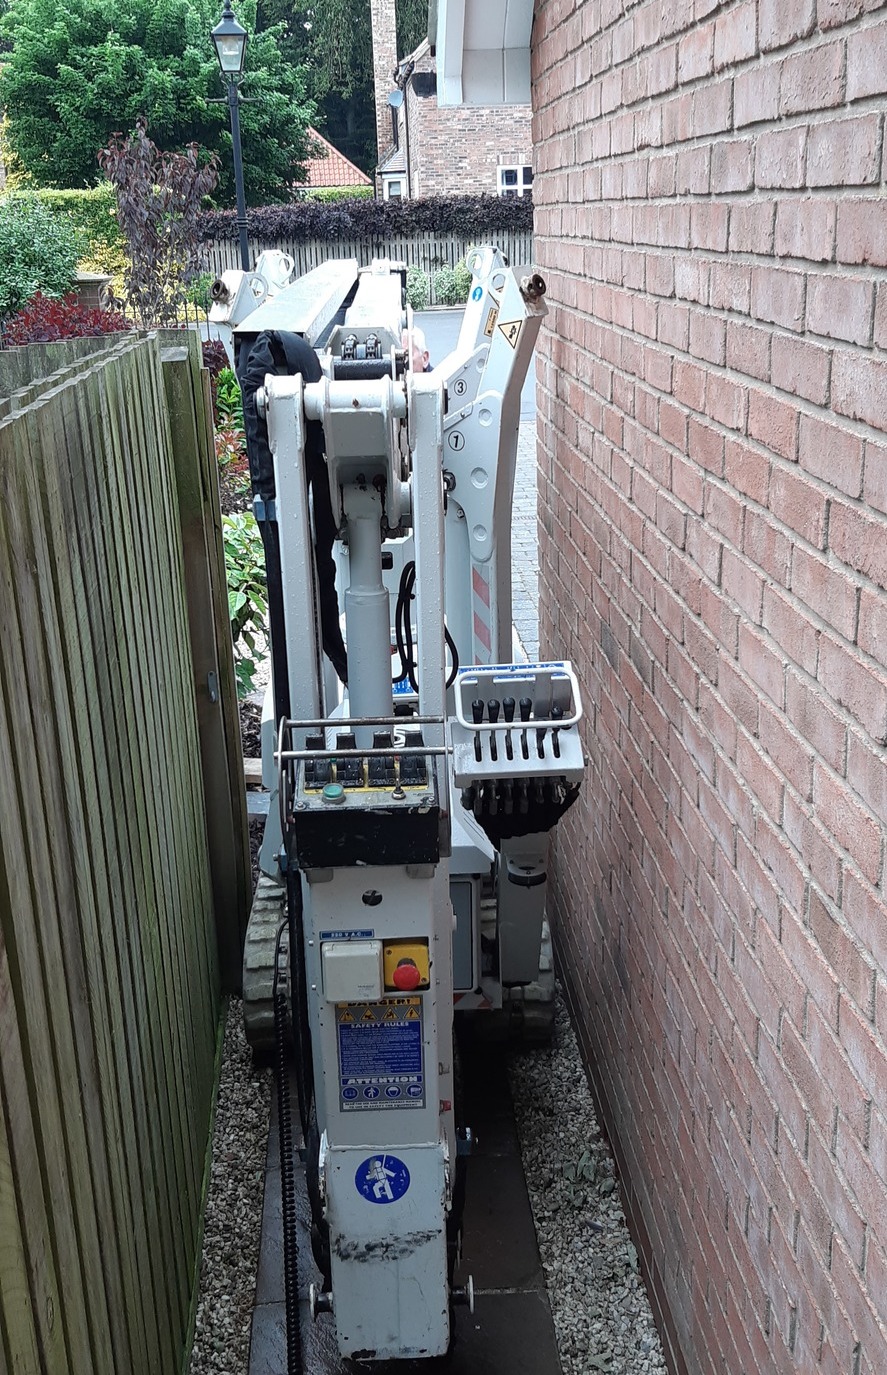 Scarlett Grace, 13m Lithium hybrid tracked spiderlift cherrypicker from High Reaching Solutions, going through narrow alleyway for building maintenance near Malton, North Yorkshire